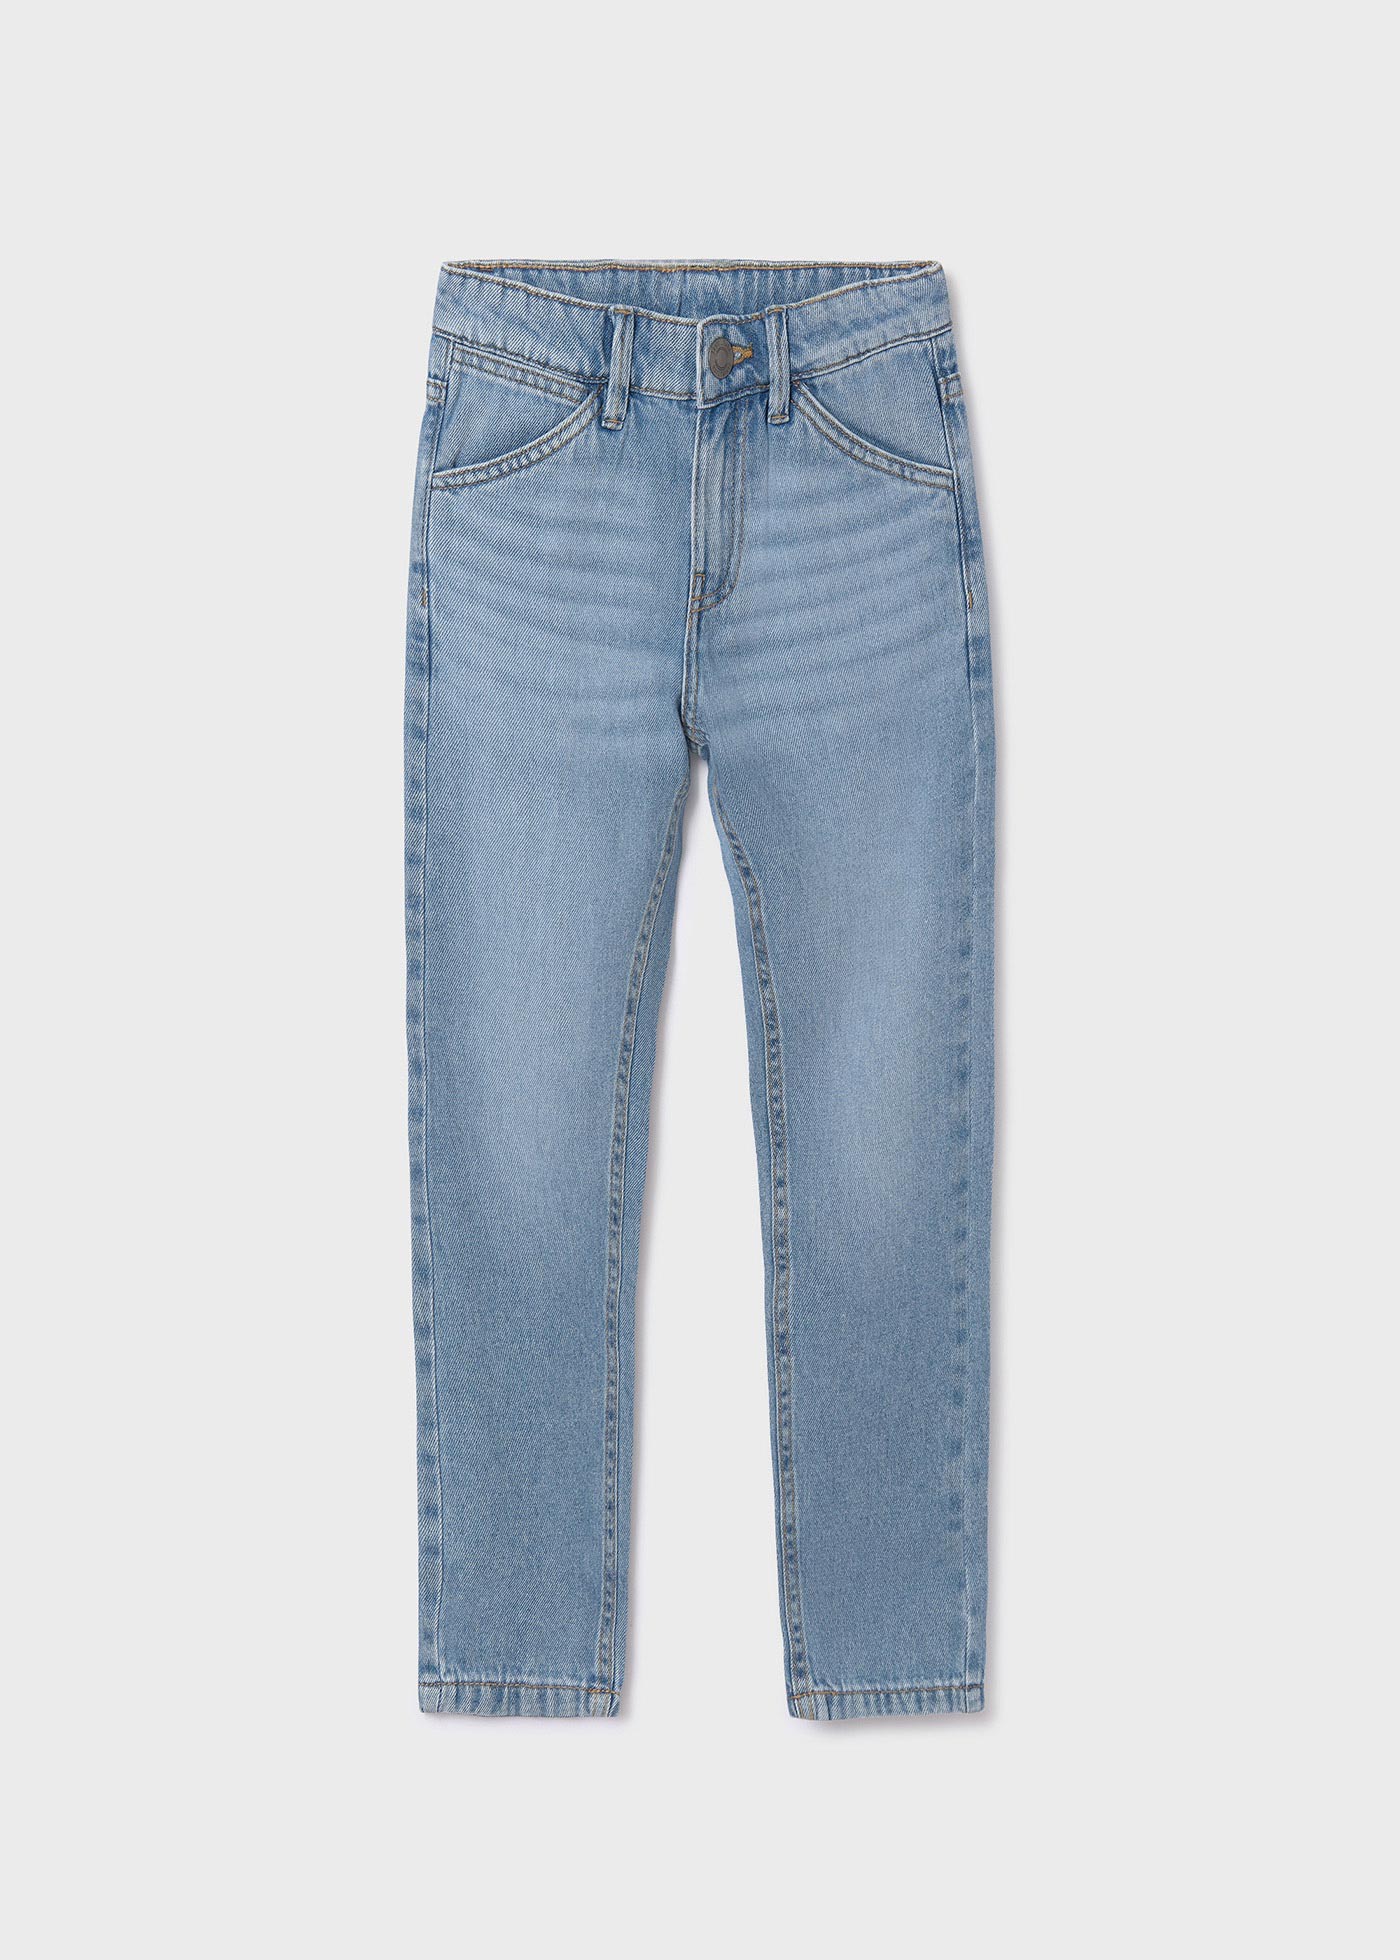 Boys jeans straight fit Better Cotton